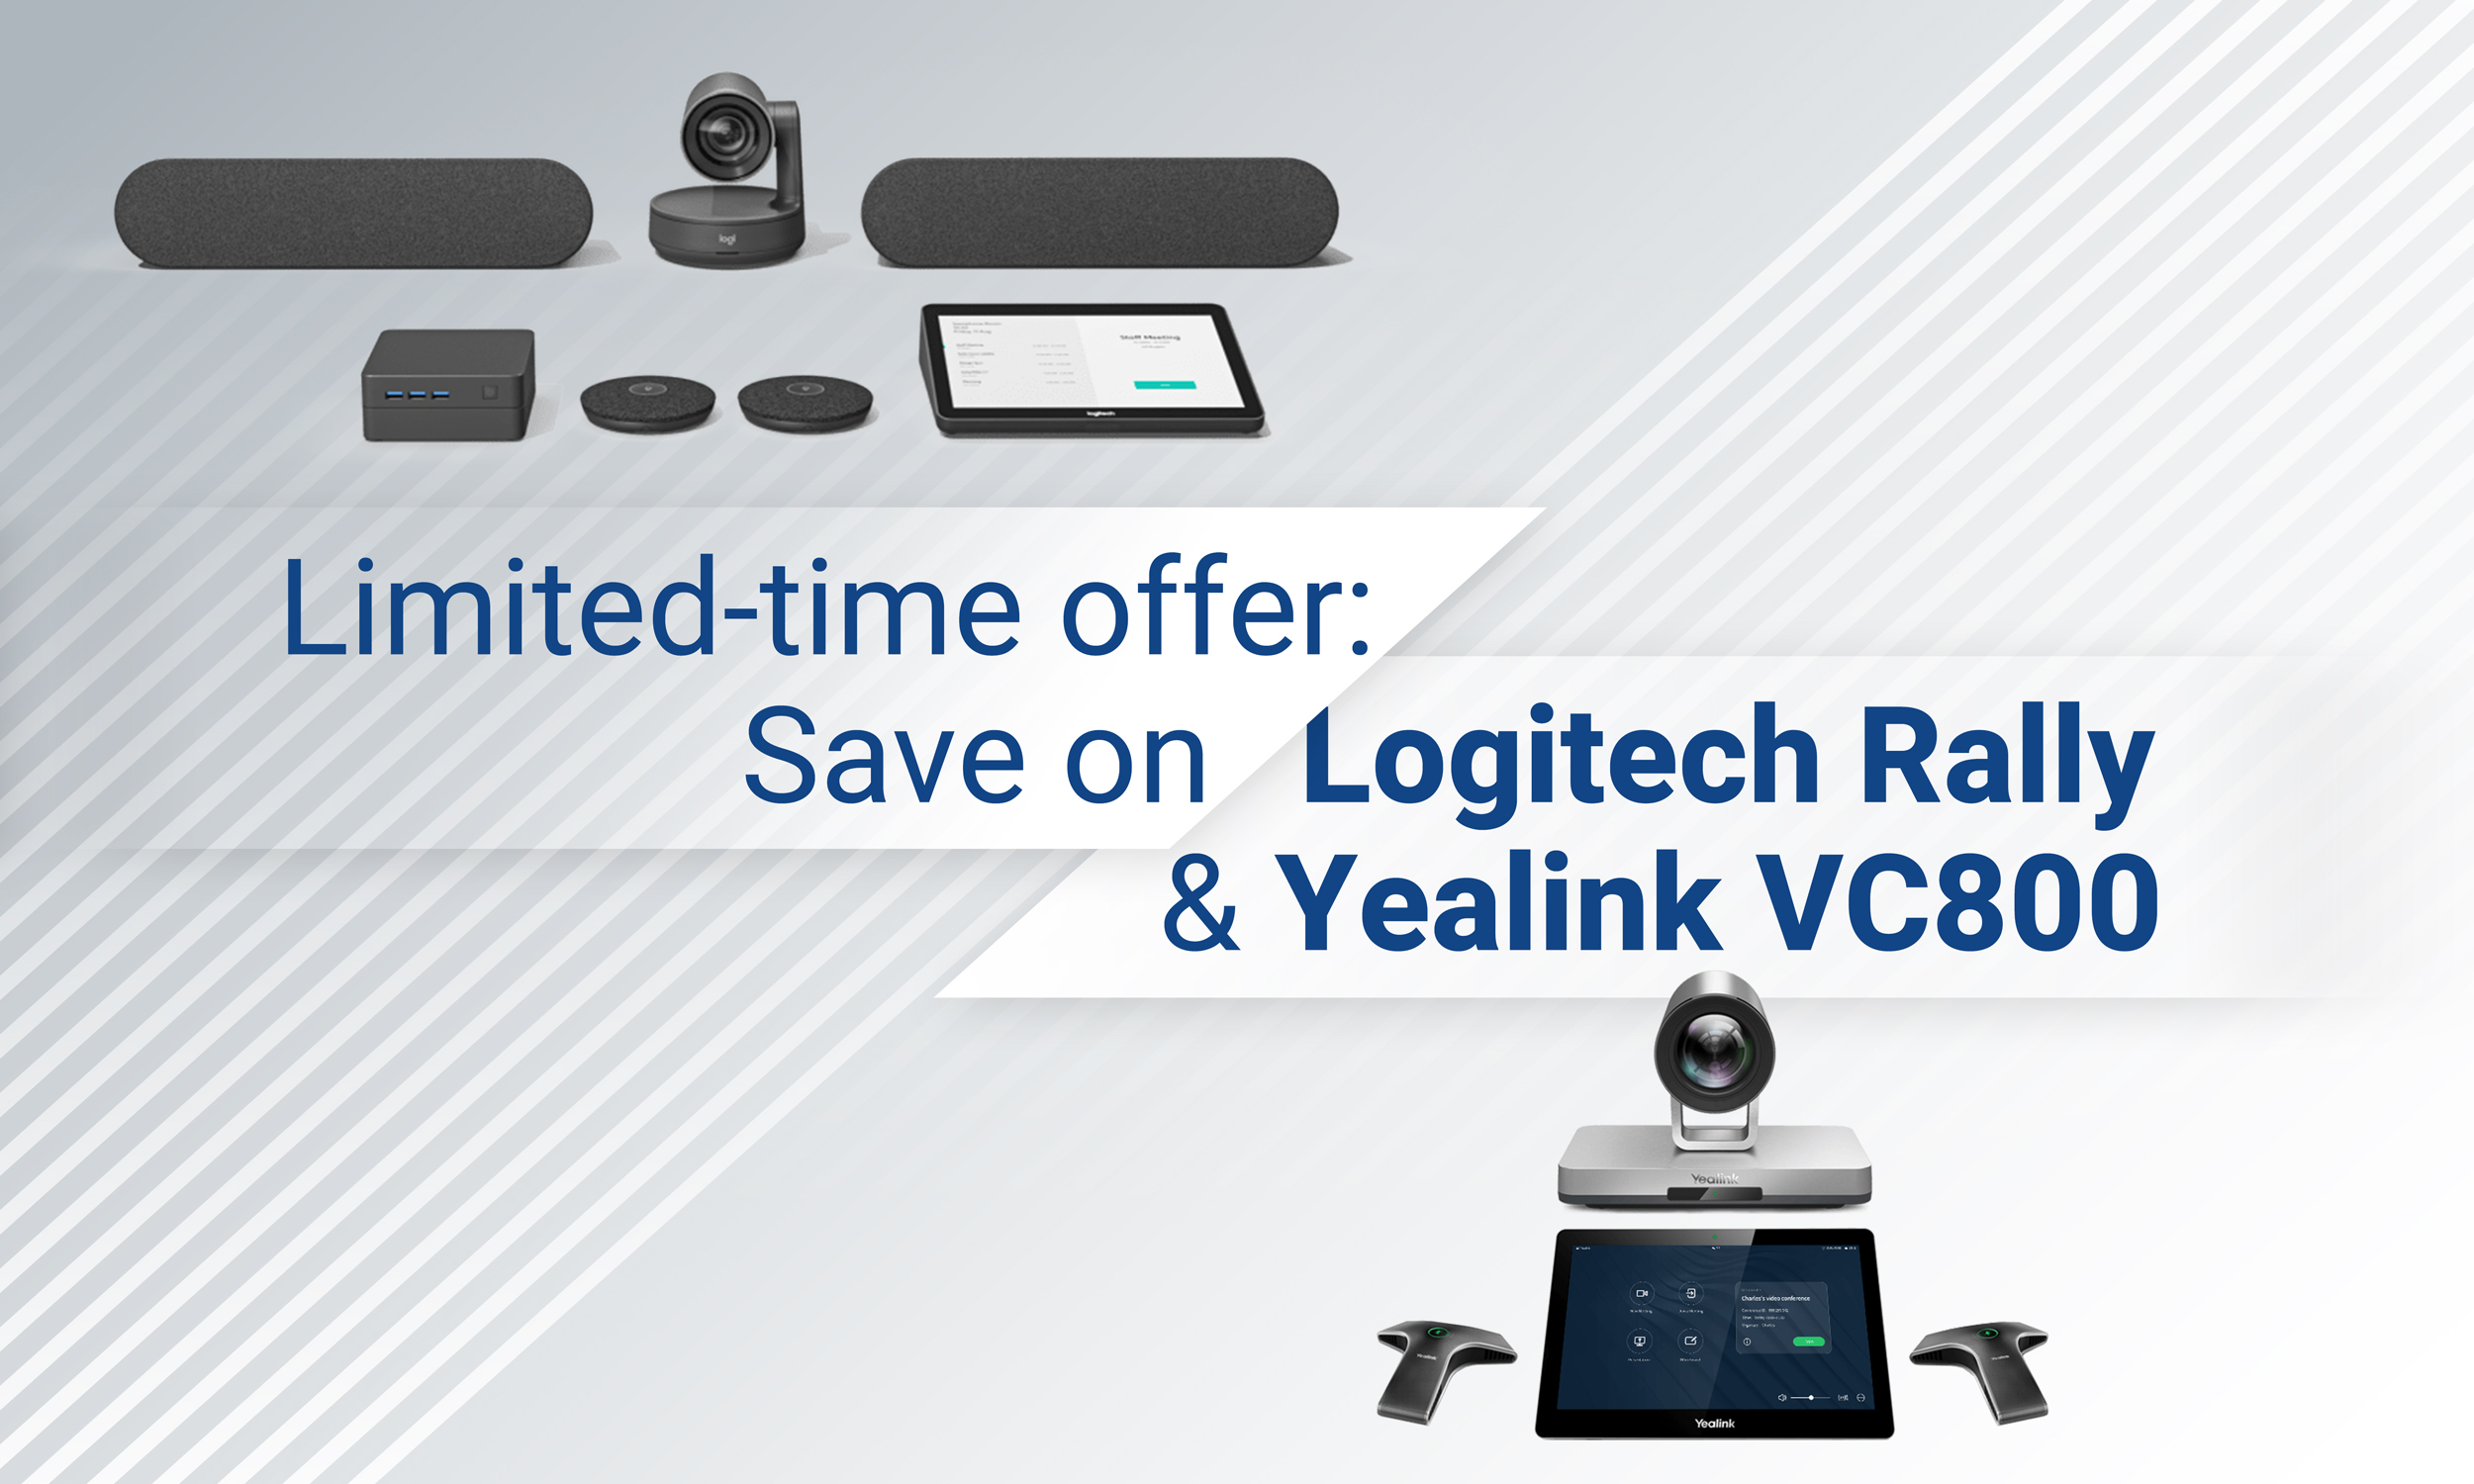 Unmissable Savings on Logitech Rally and Yealink VC800!